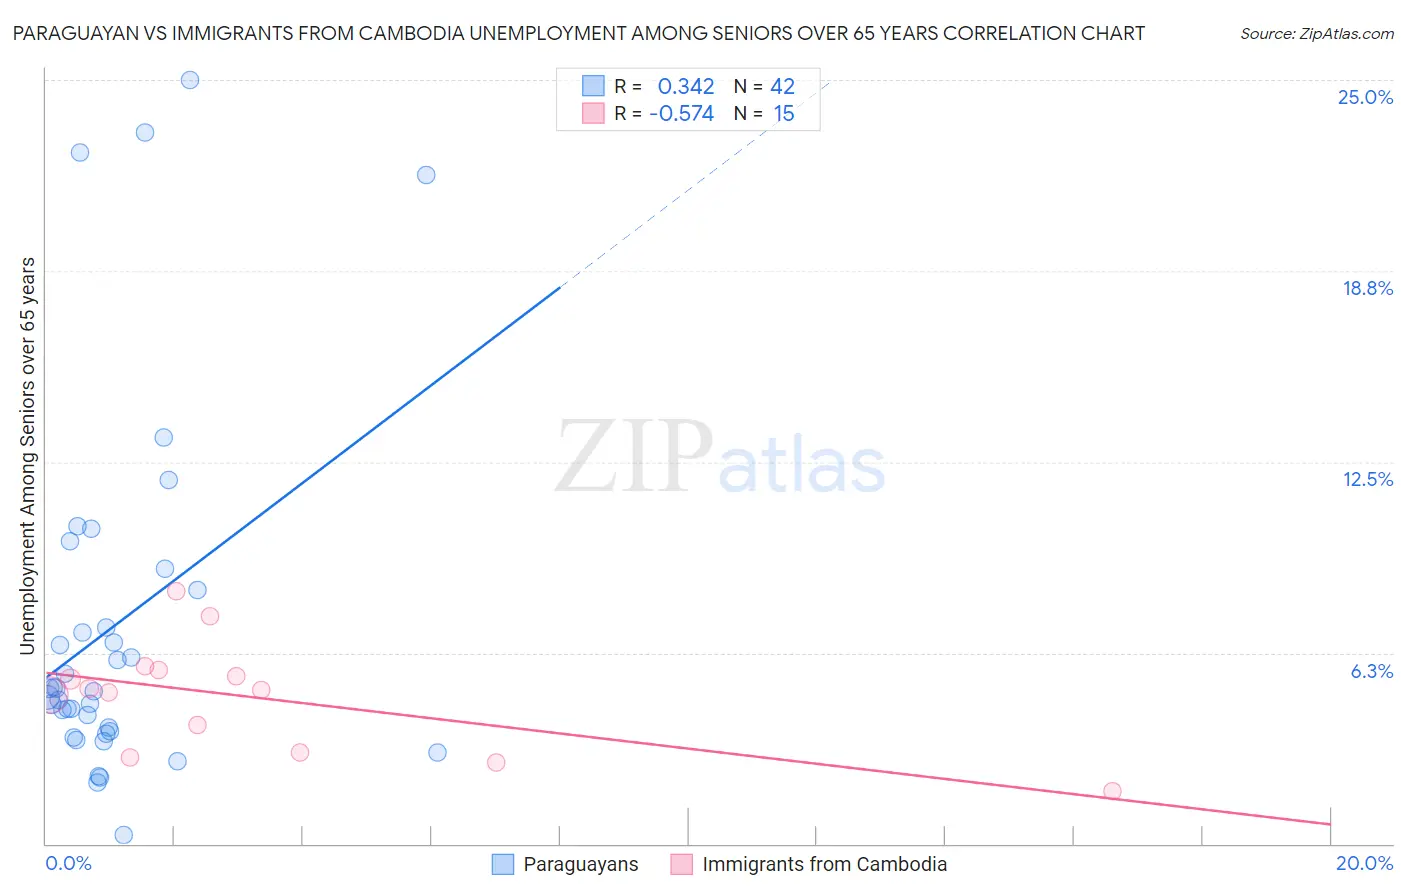 Paraguayan vs Immigrants from Cambodia Unemployment Among Seniors over 65 years